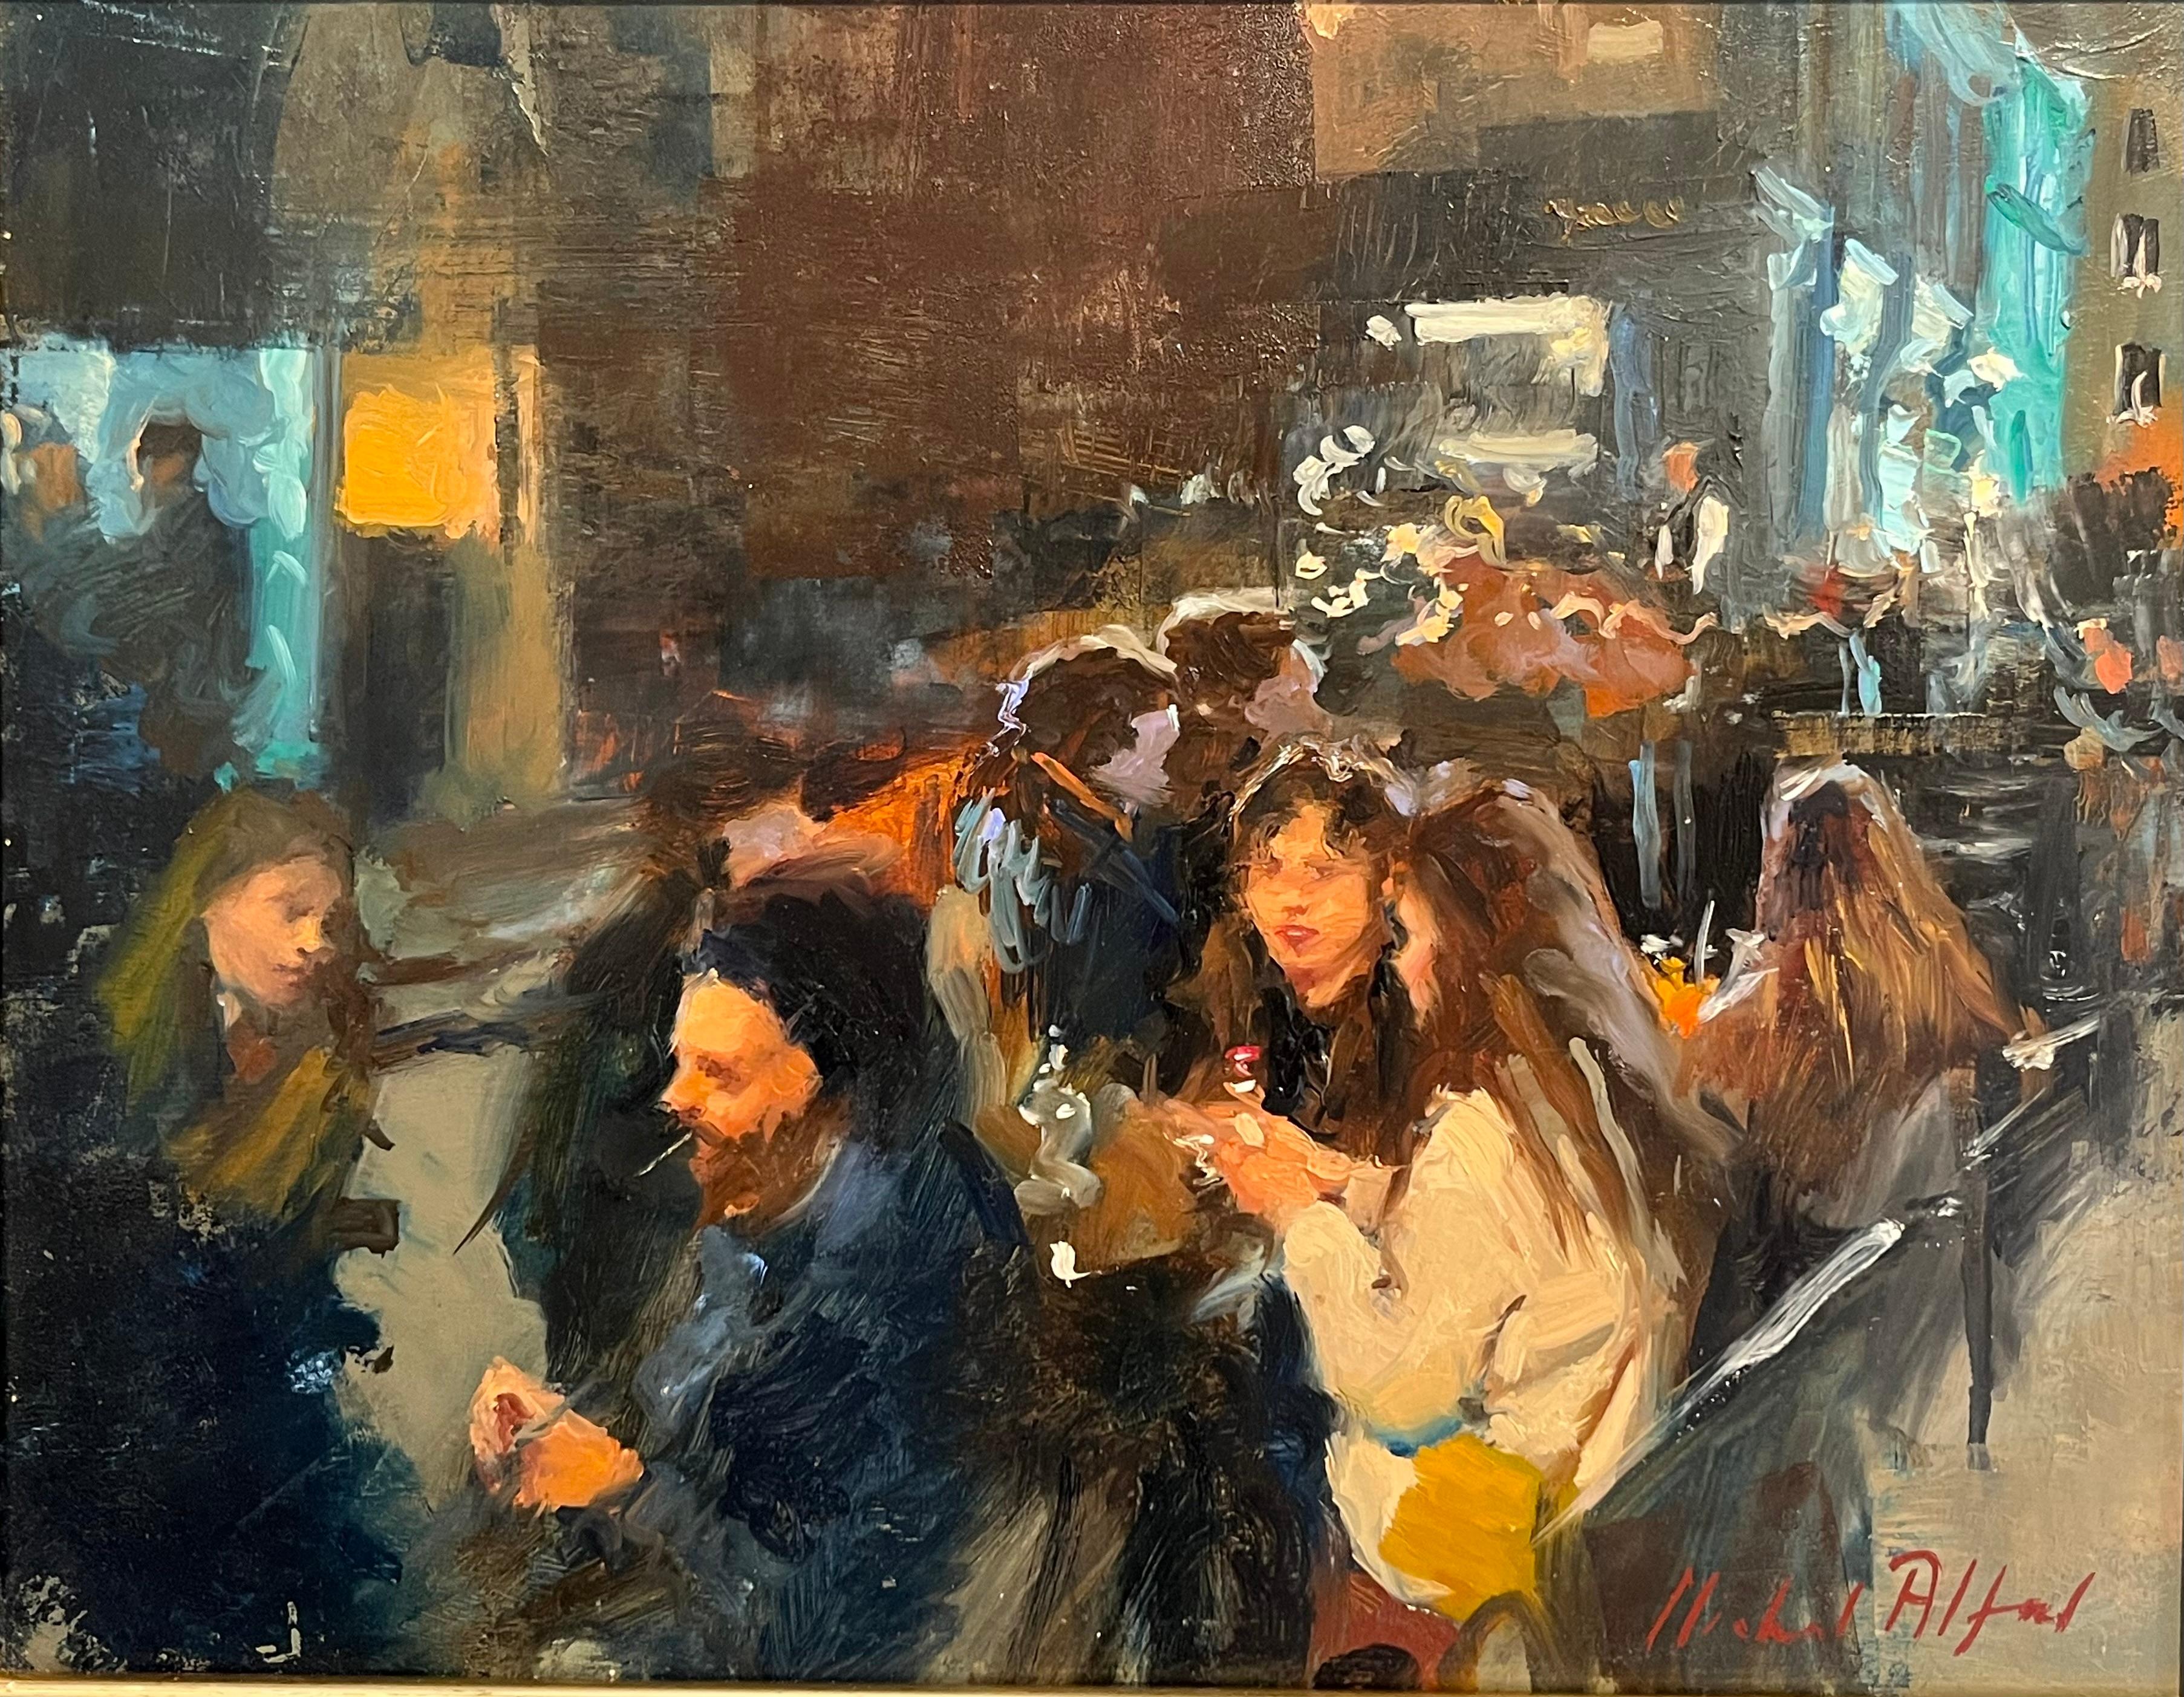 Outside Dining, West End-original impressionism figurative cityscape painting 